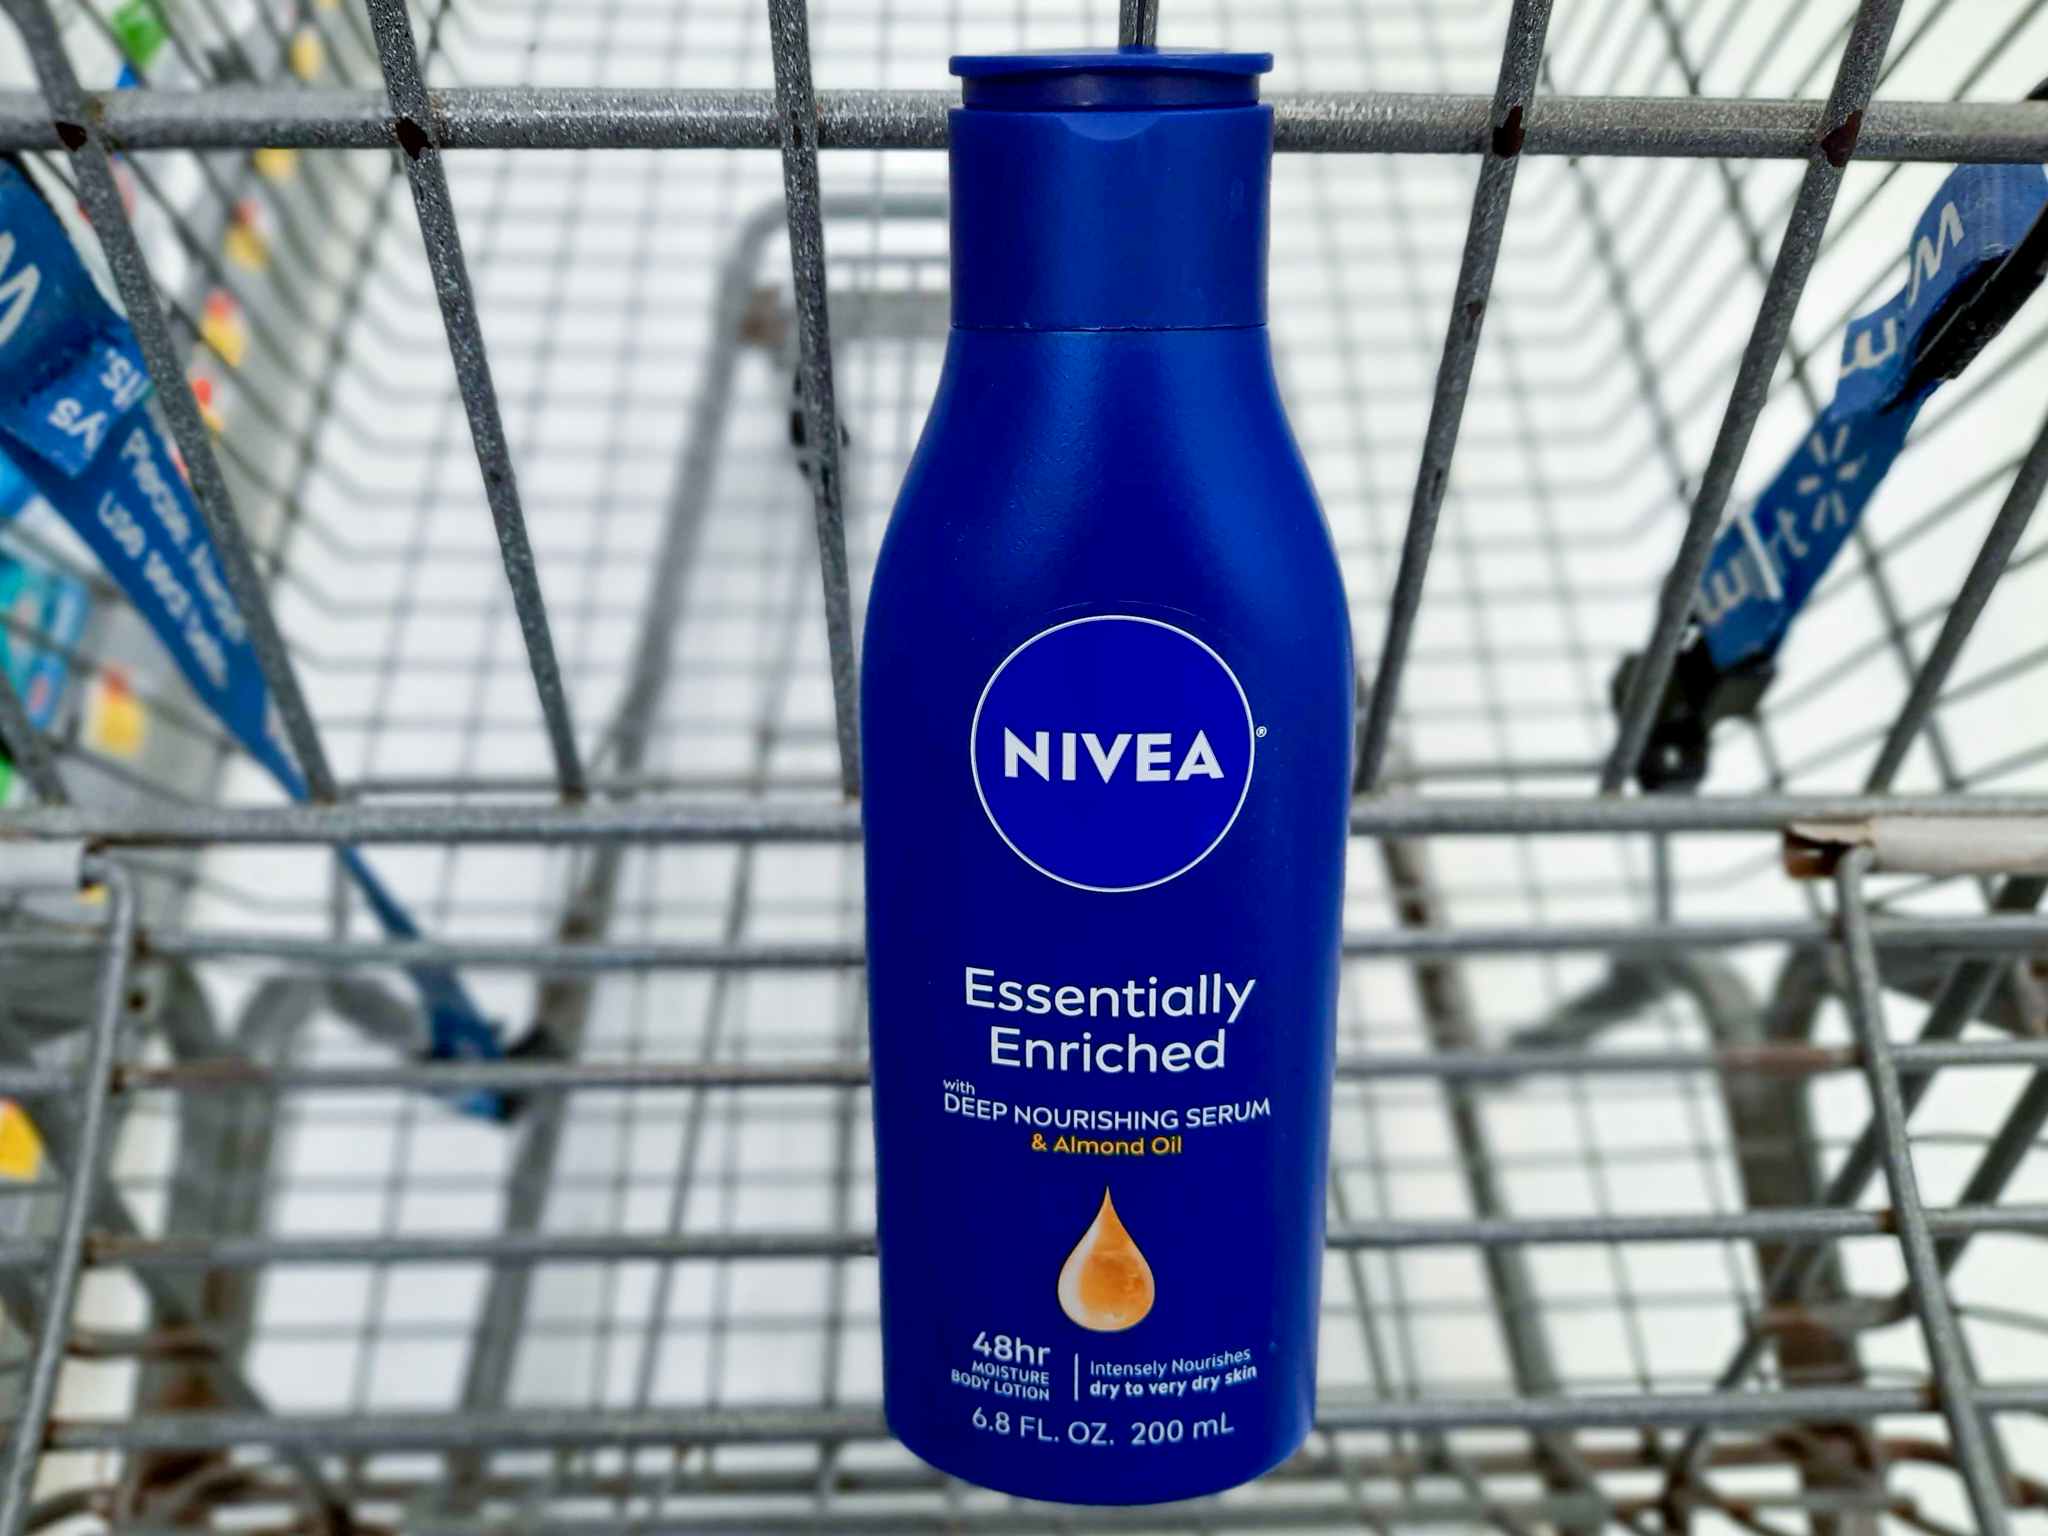 Nivea Essentially Enriched Body Lotion in Walmart shopping cart